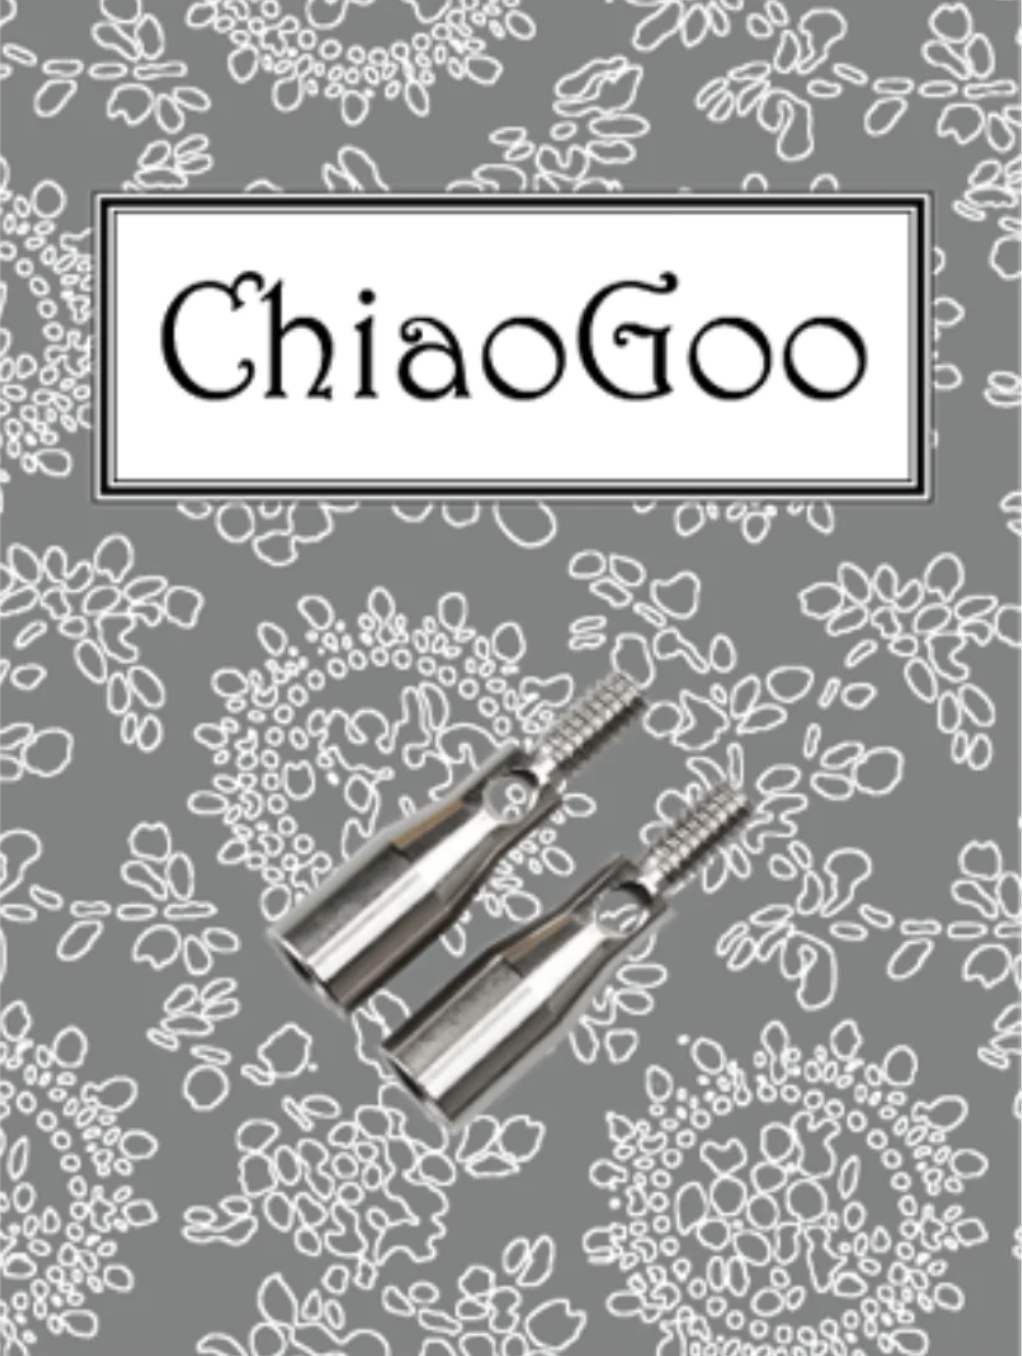 Chiagoo - Tip Adapters - YourNextKnit